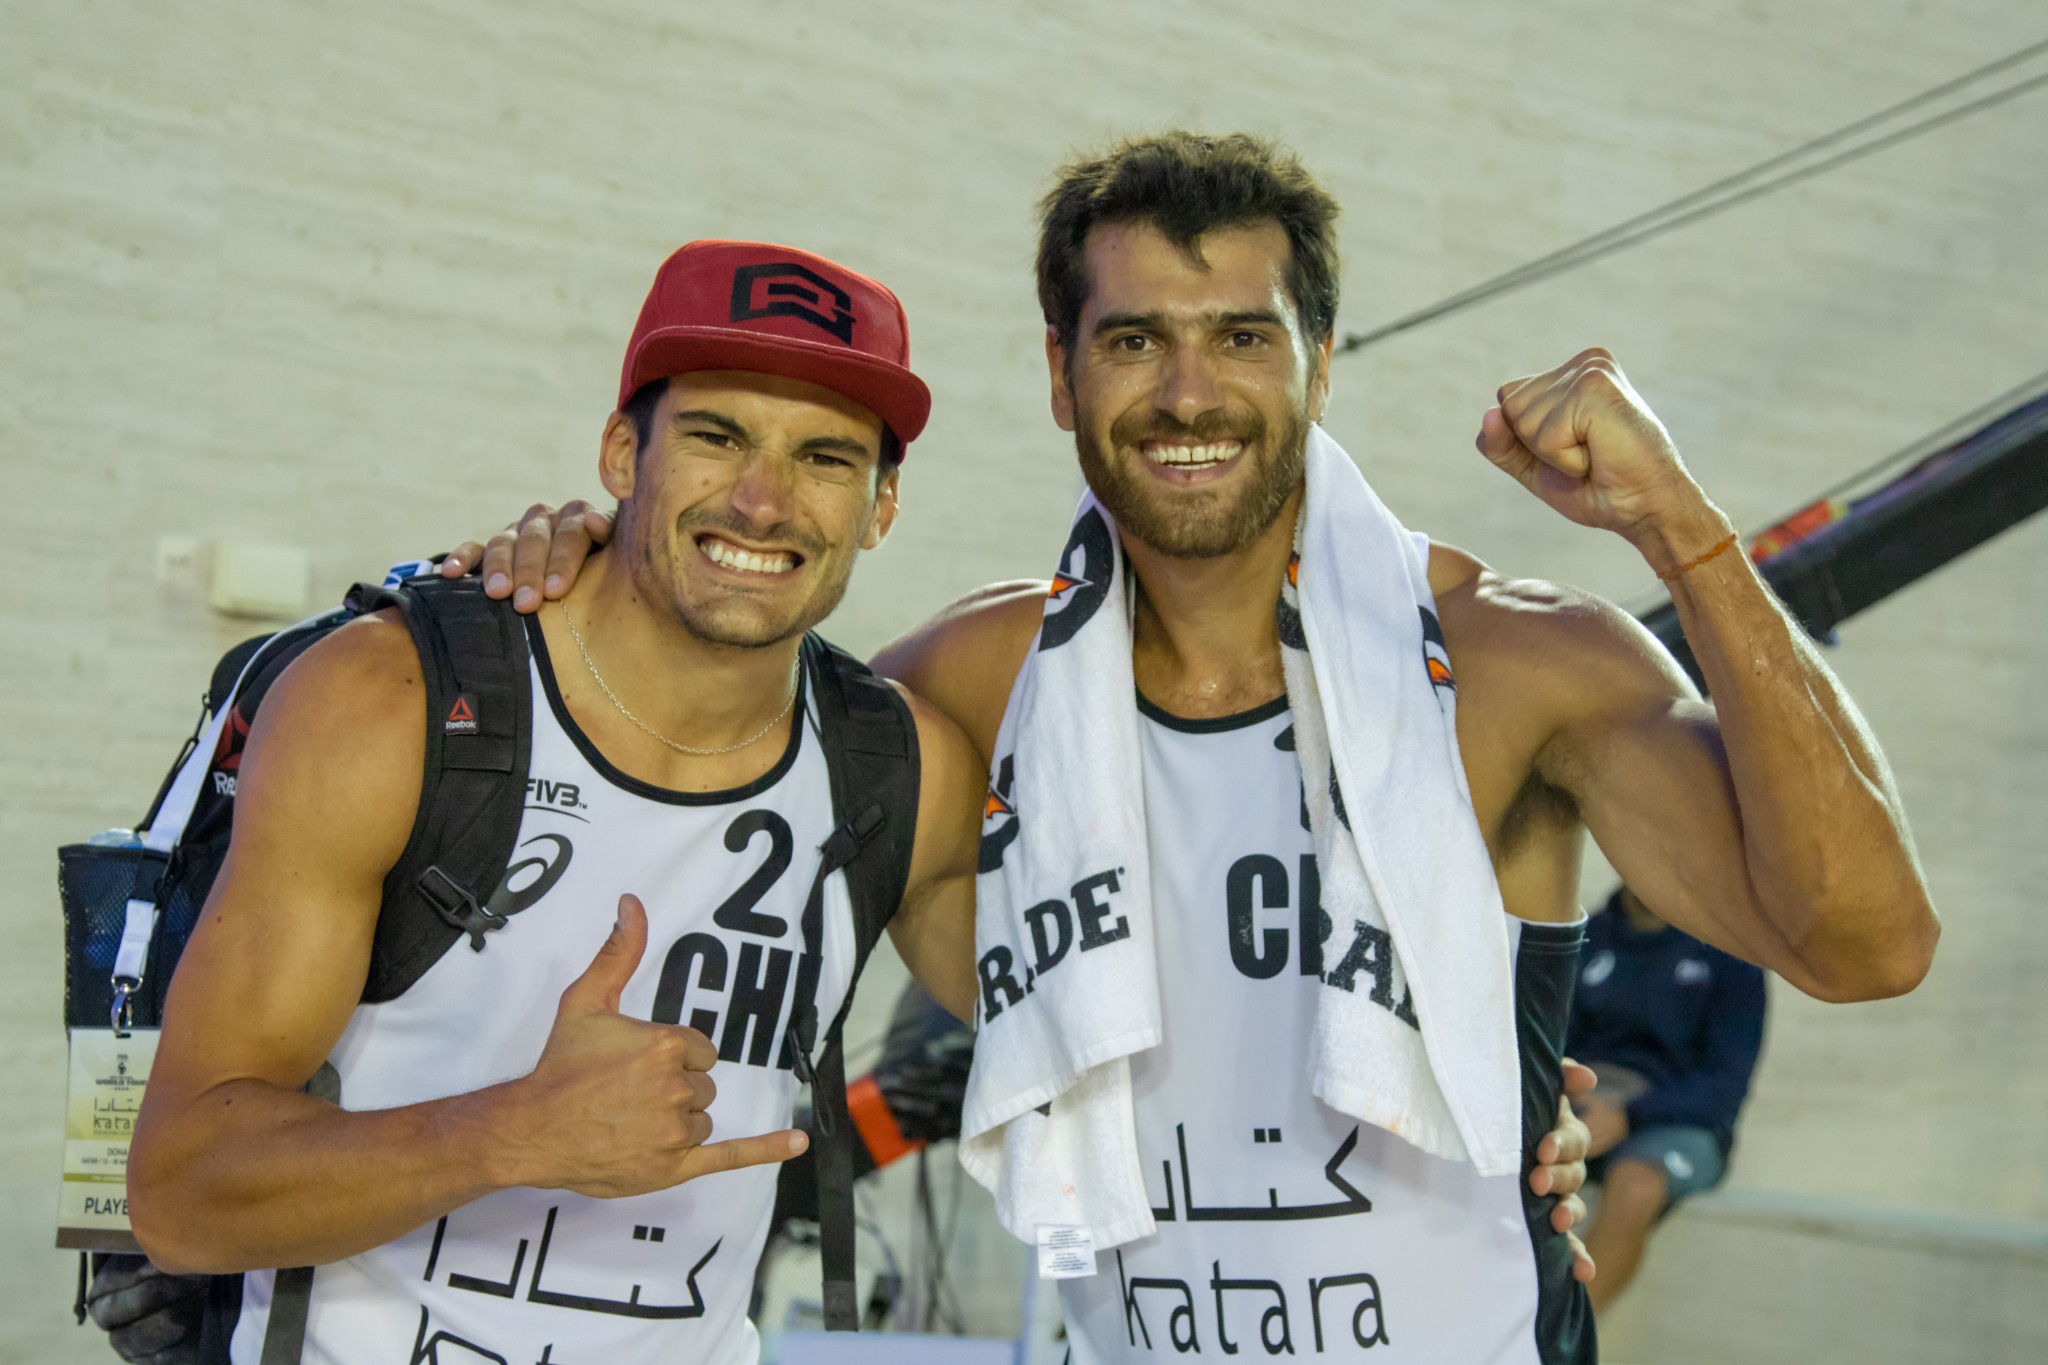 Chilean cousins Esteban and Marco Grimalt are in the final at Doha and seeking their second successive title in the FIVB Beach Volleyball World Tour series ©FIVB